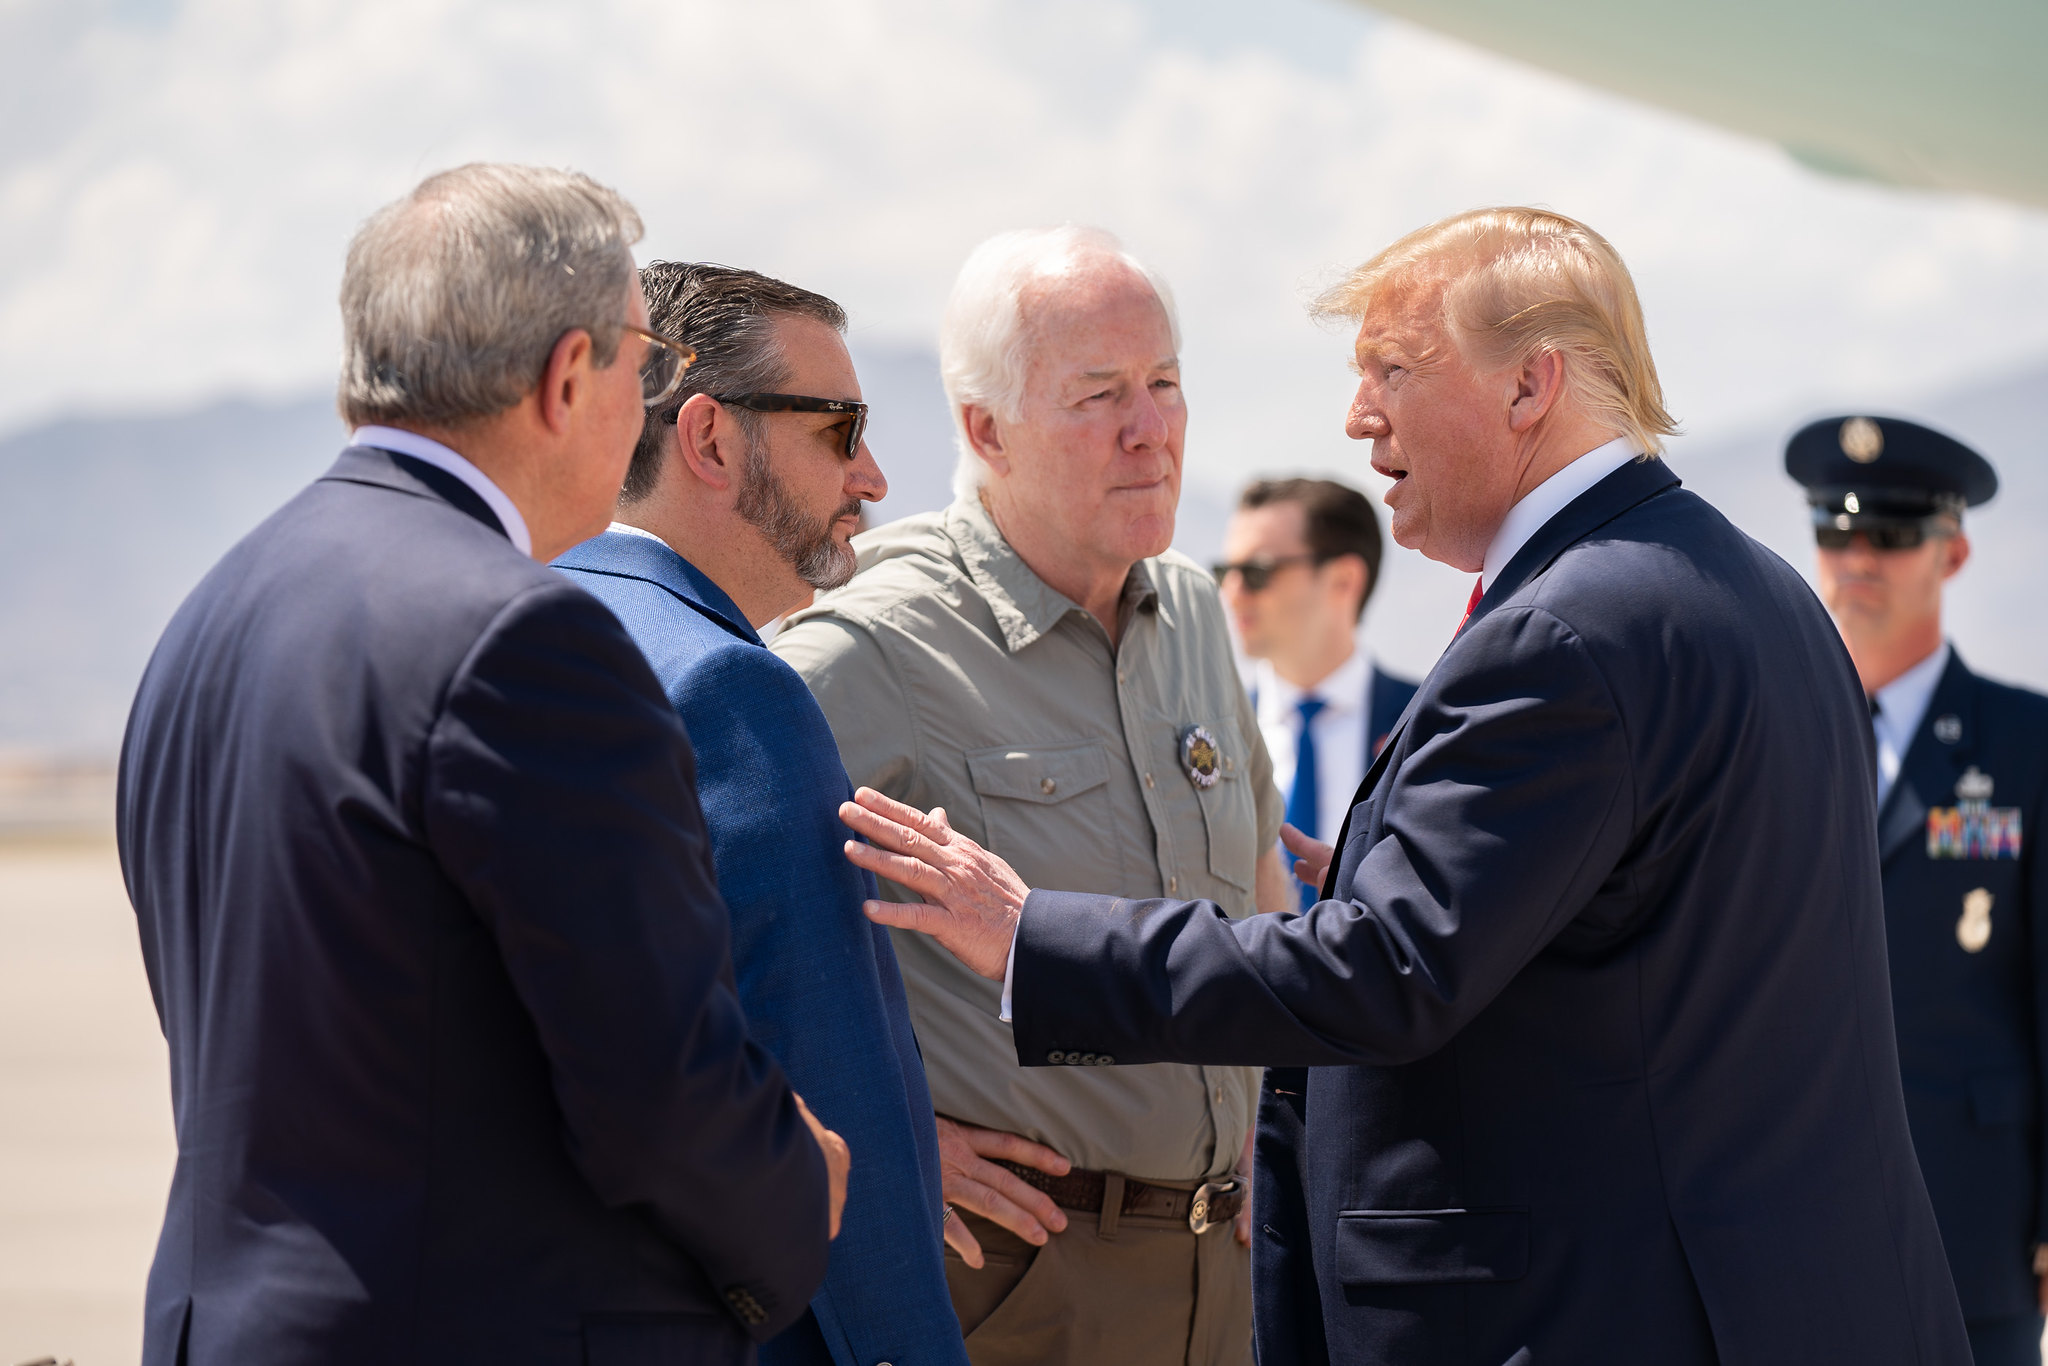 Gov. Greg Abbott, Sen. Ted Cruz, and other Texas officials greet President Trump at the El Paso Airport. Official WH photo.